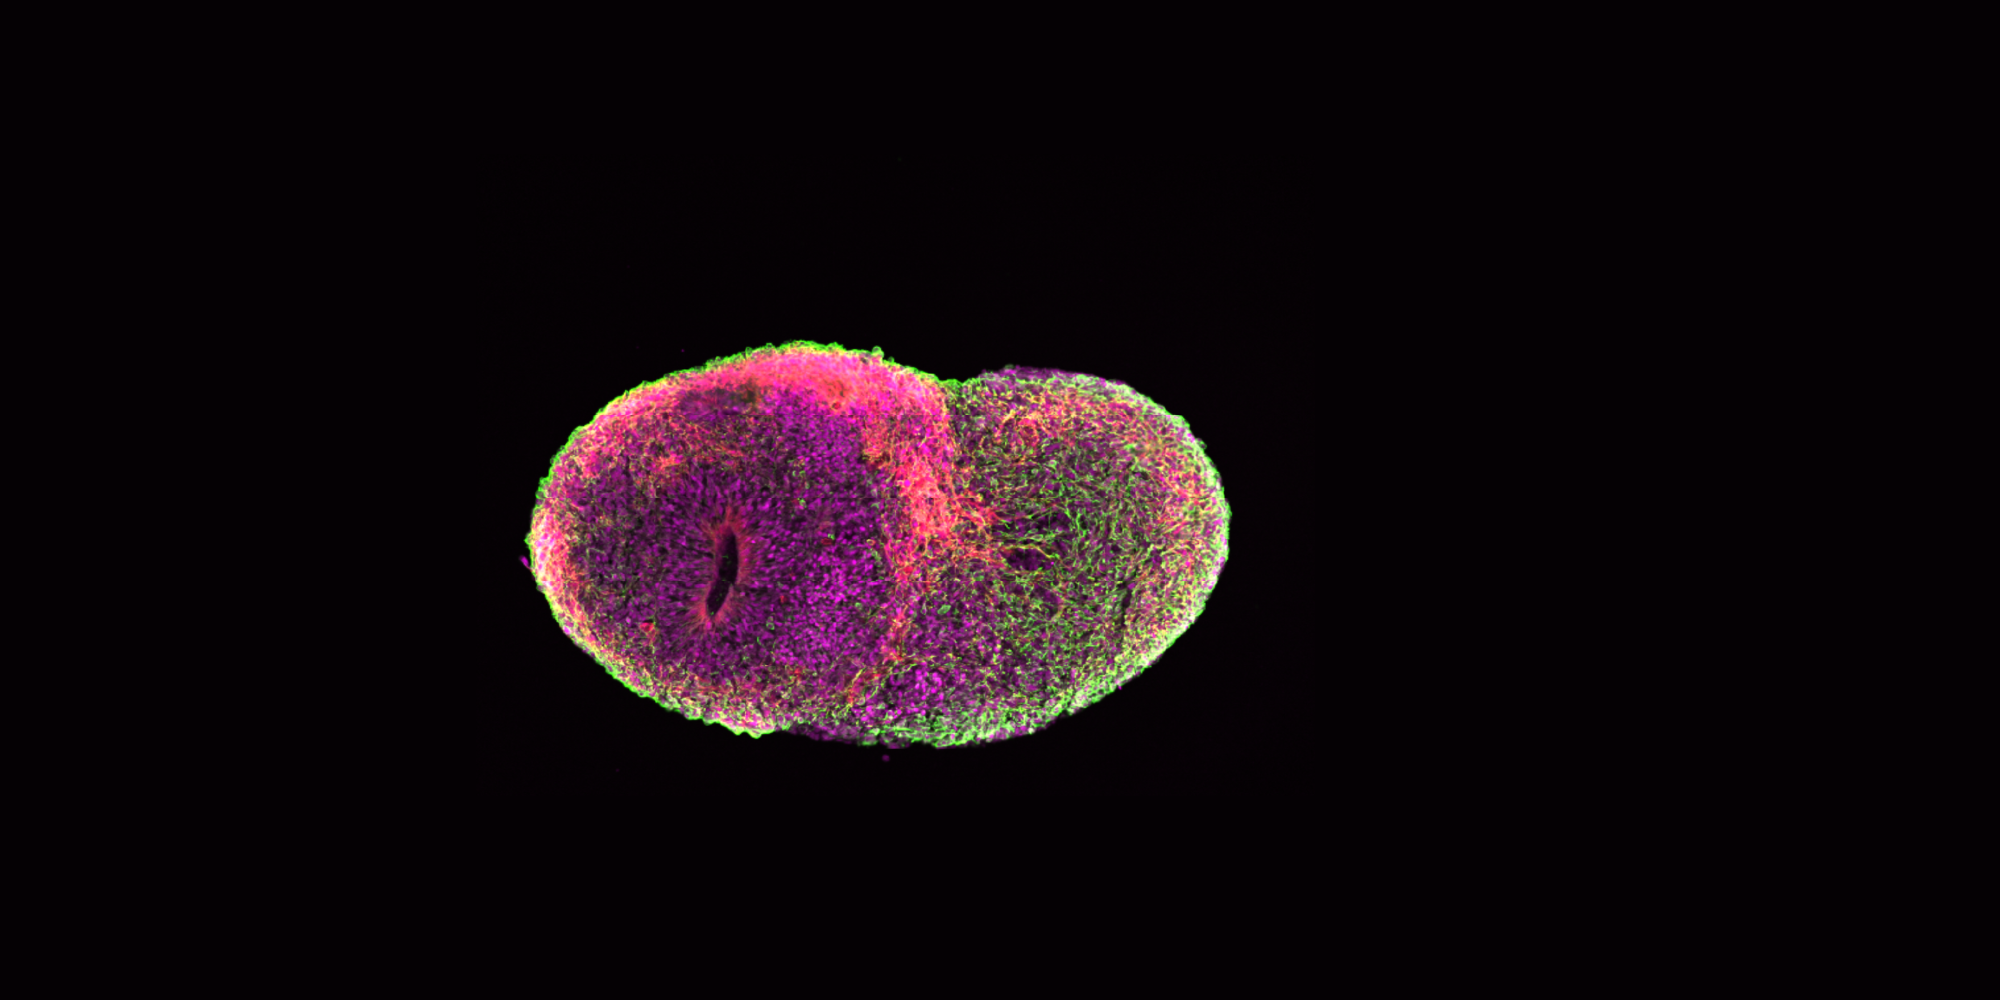 A brain organoid, photographed with greens, pinks, and magentas and suspended against a black background